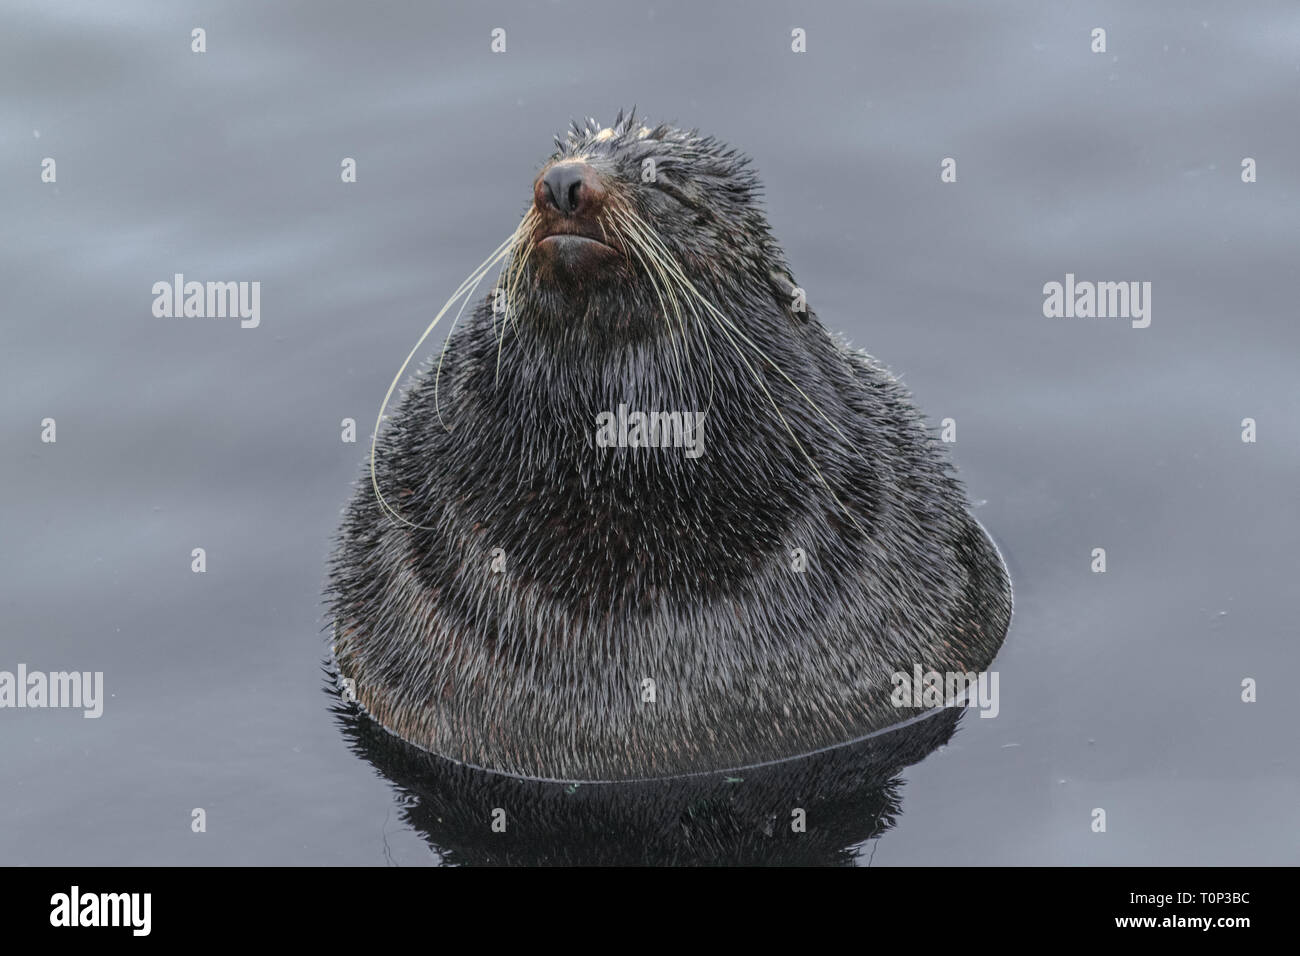 Northern fur seal (Callorhinus ursinus), very relaxed in the water, like in a spa Stock Photo